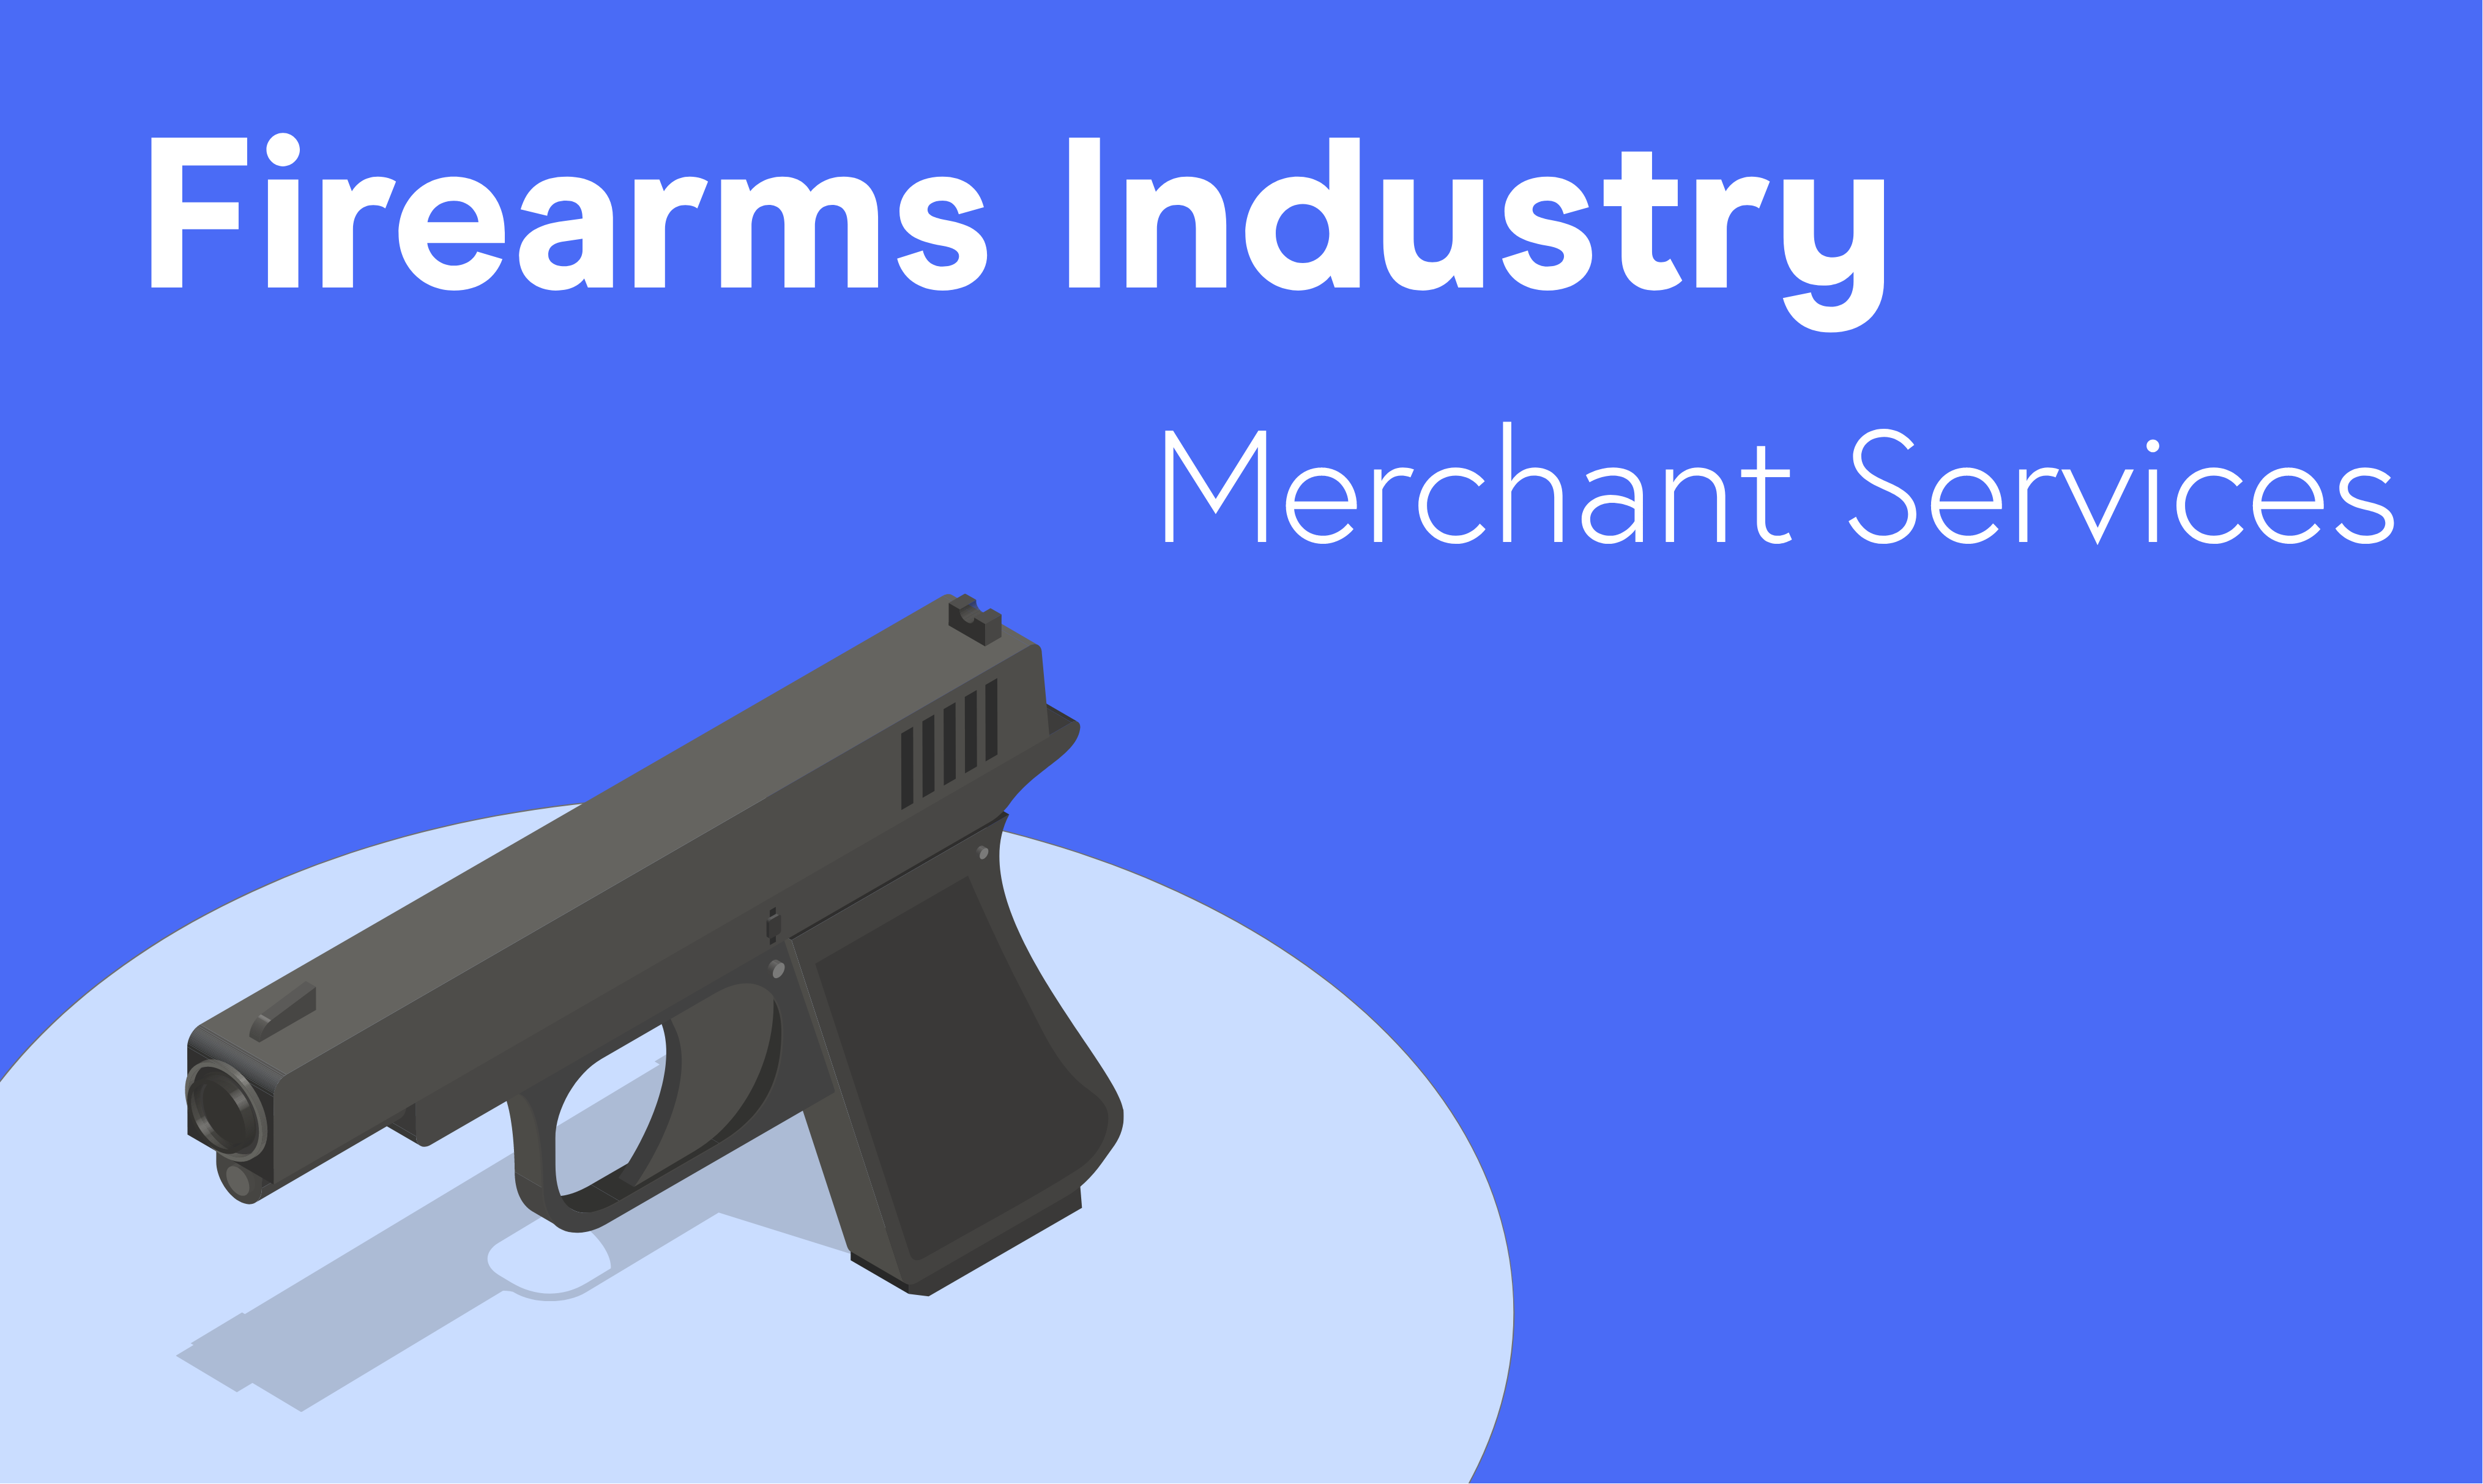 Tips to Find Your Firearms Business Merchant Provider